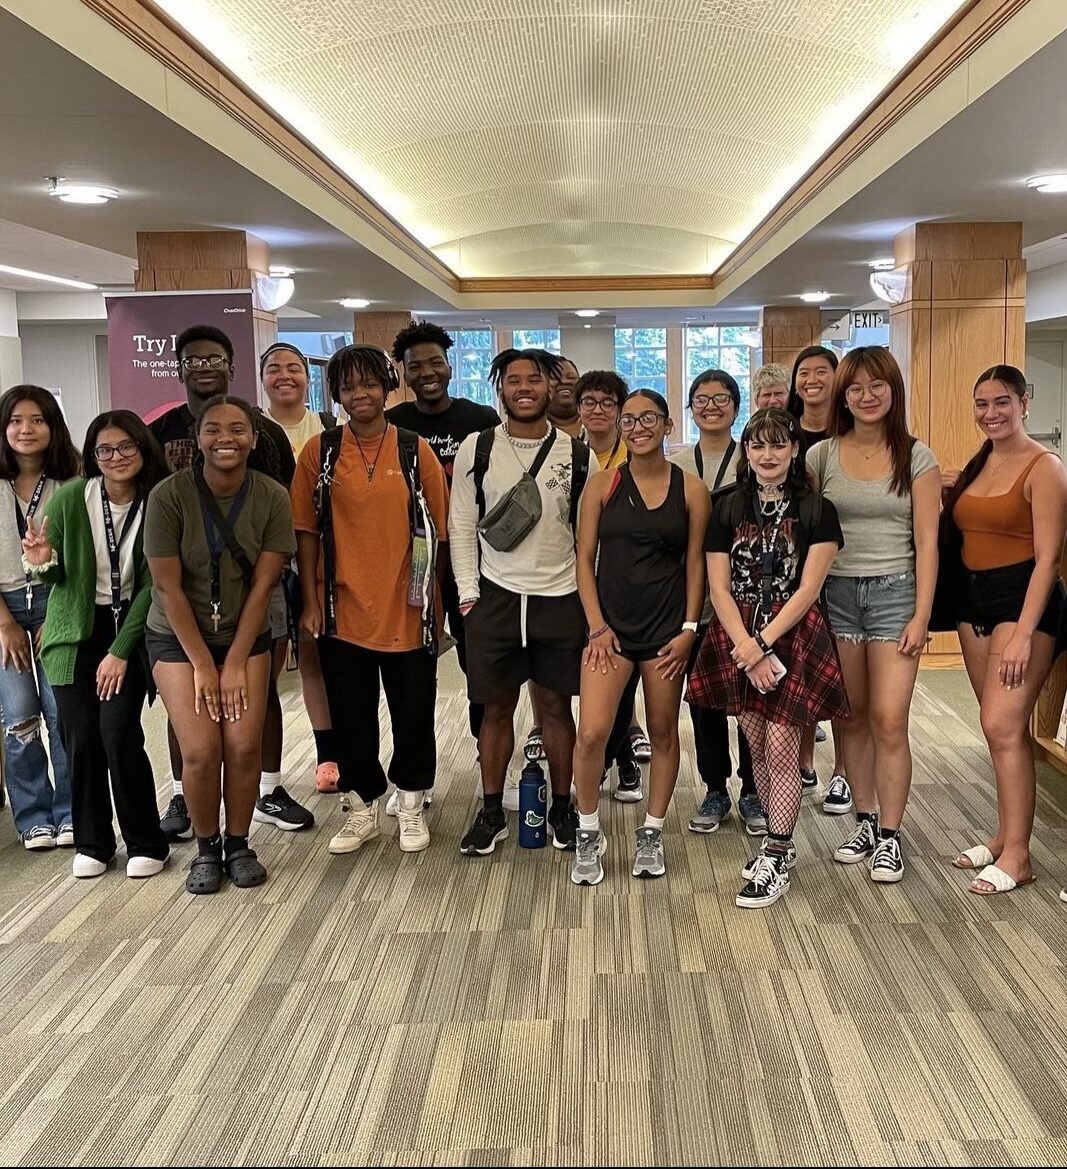 New LVC students participating in the Summer Enrichment Program pose together in the library